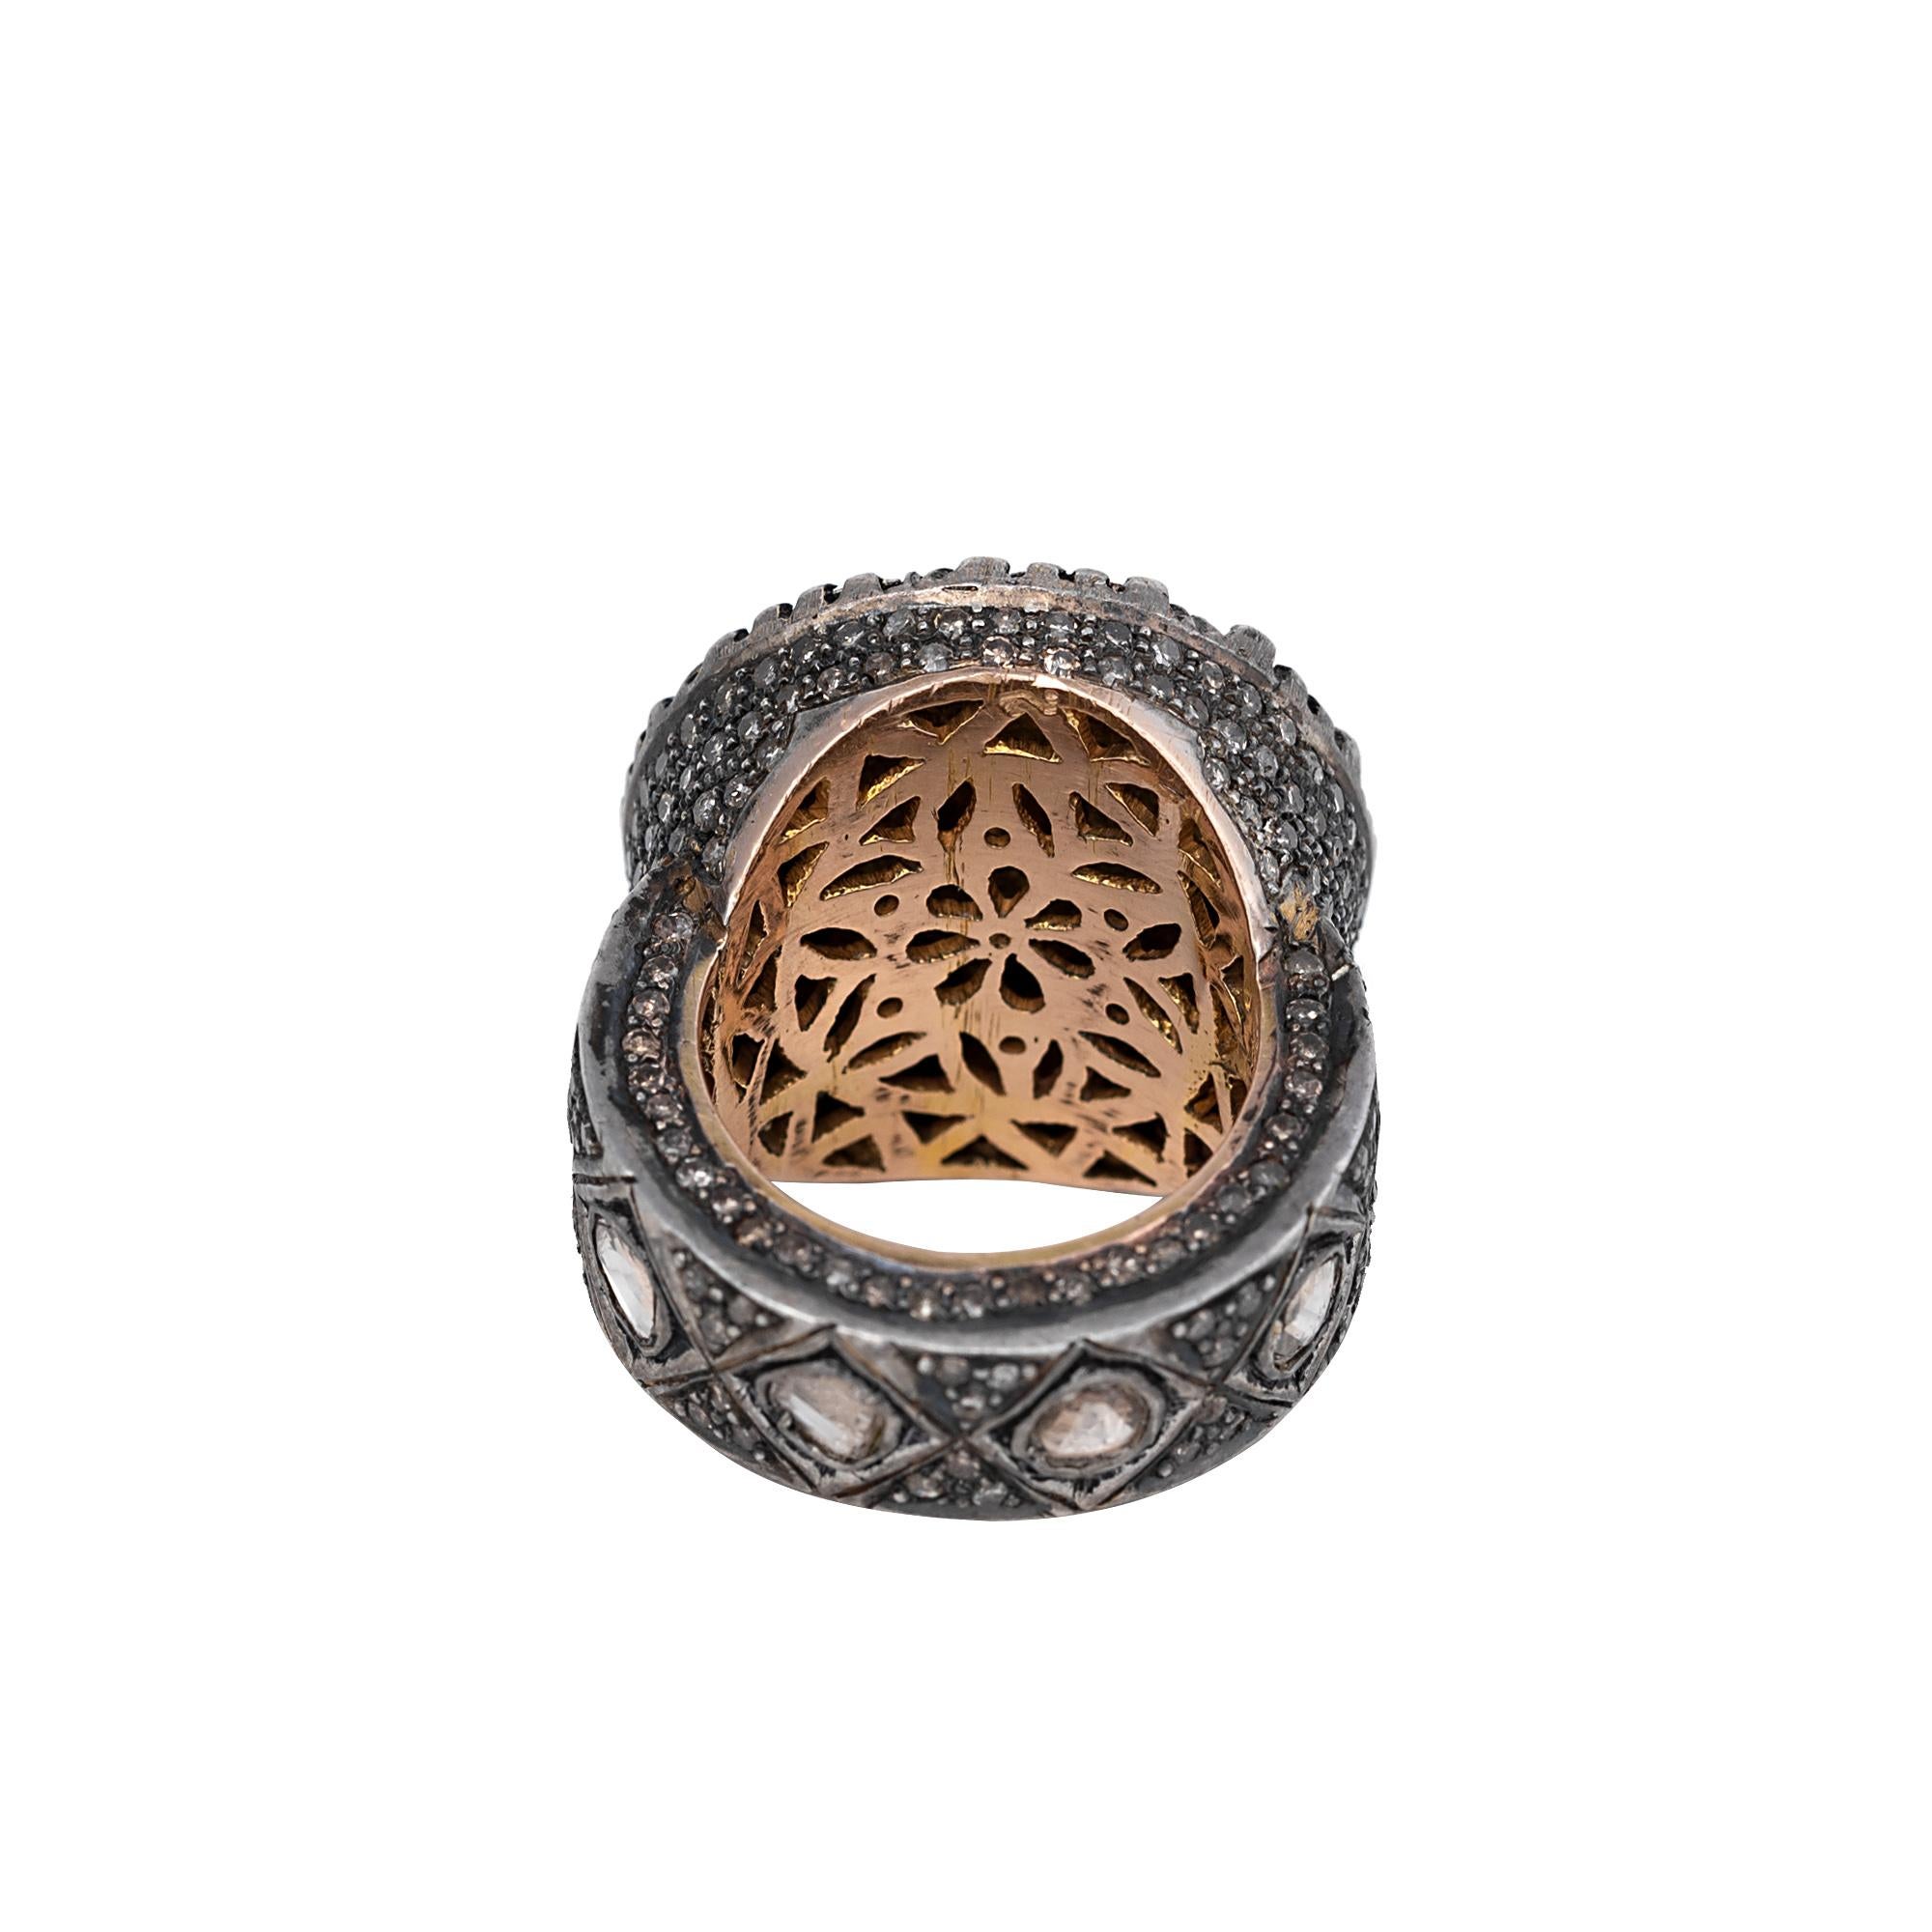 Uncut 3.15 Carat Diamond Polki Handcrafted Vintage-Style Ring For Sale